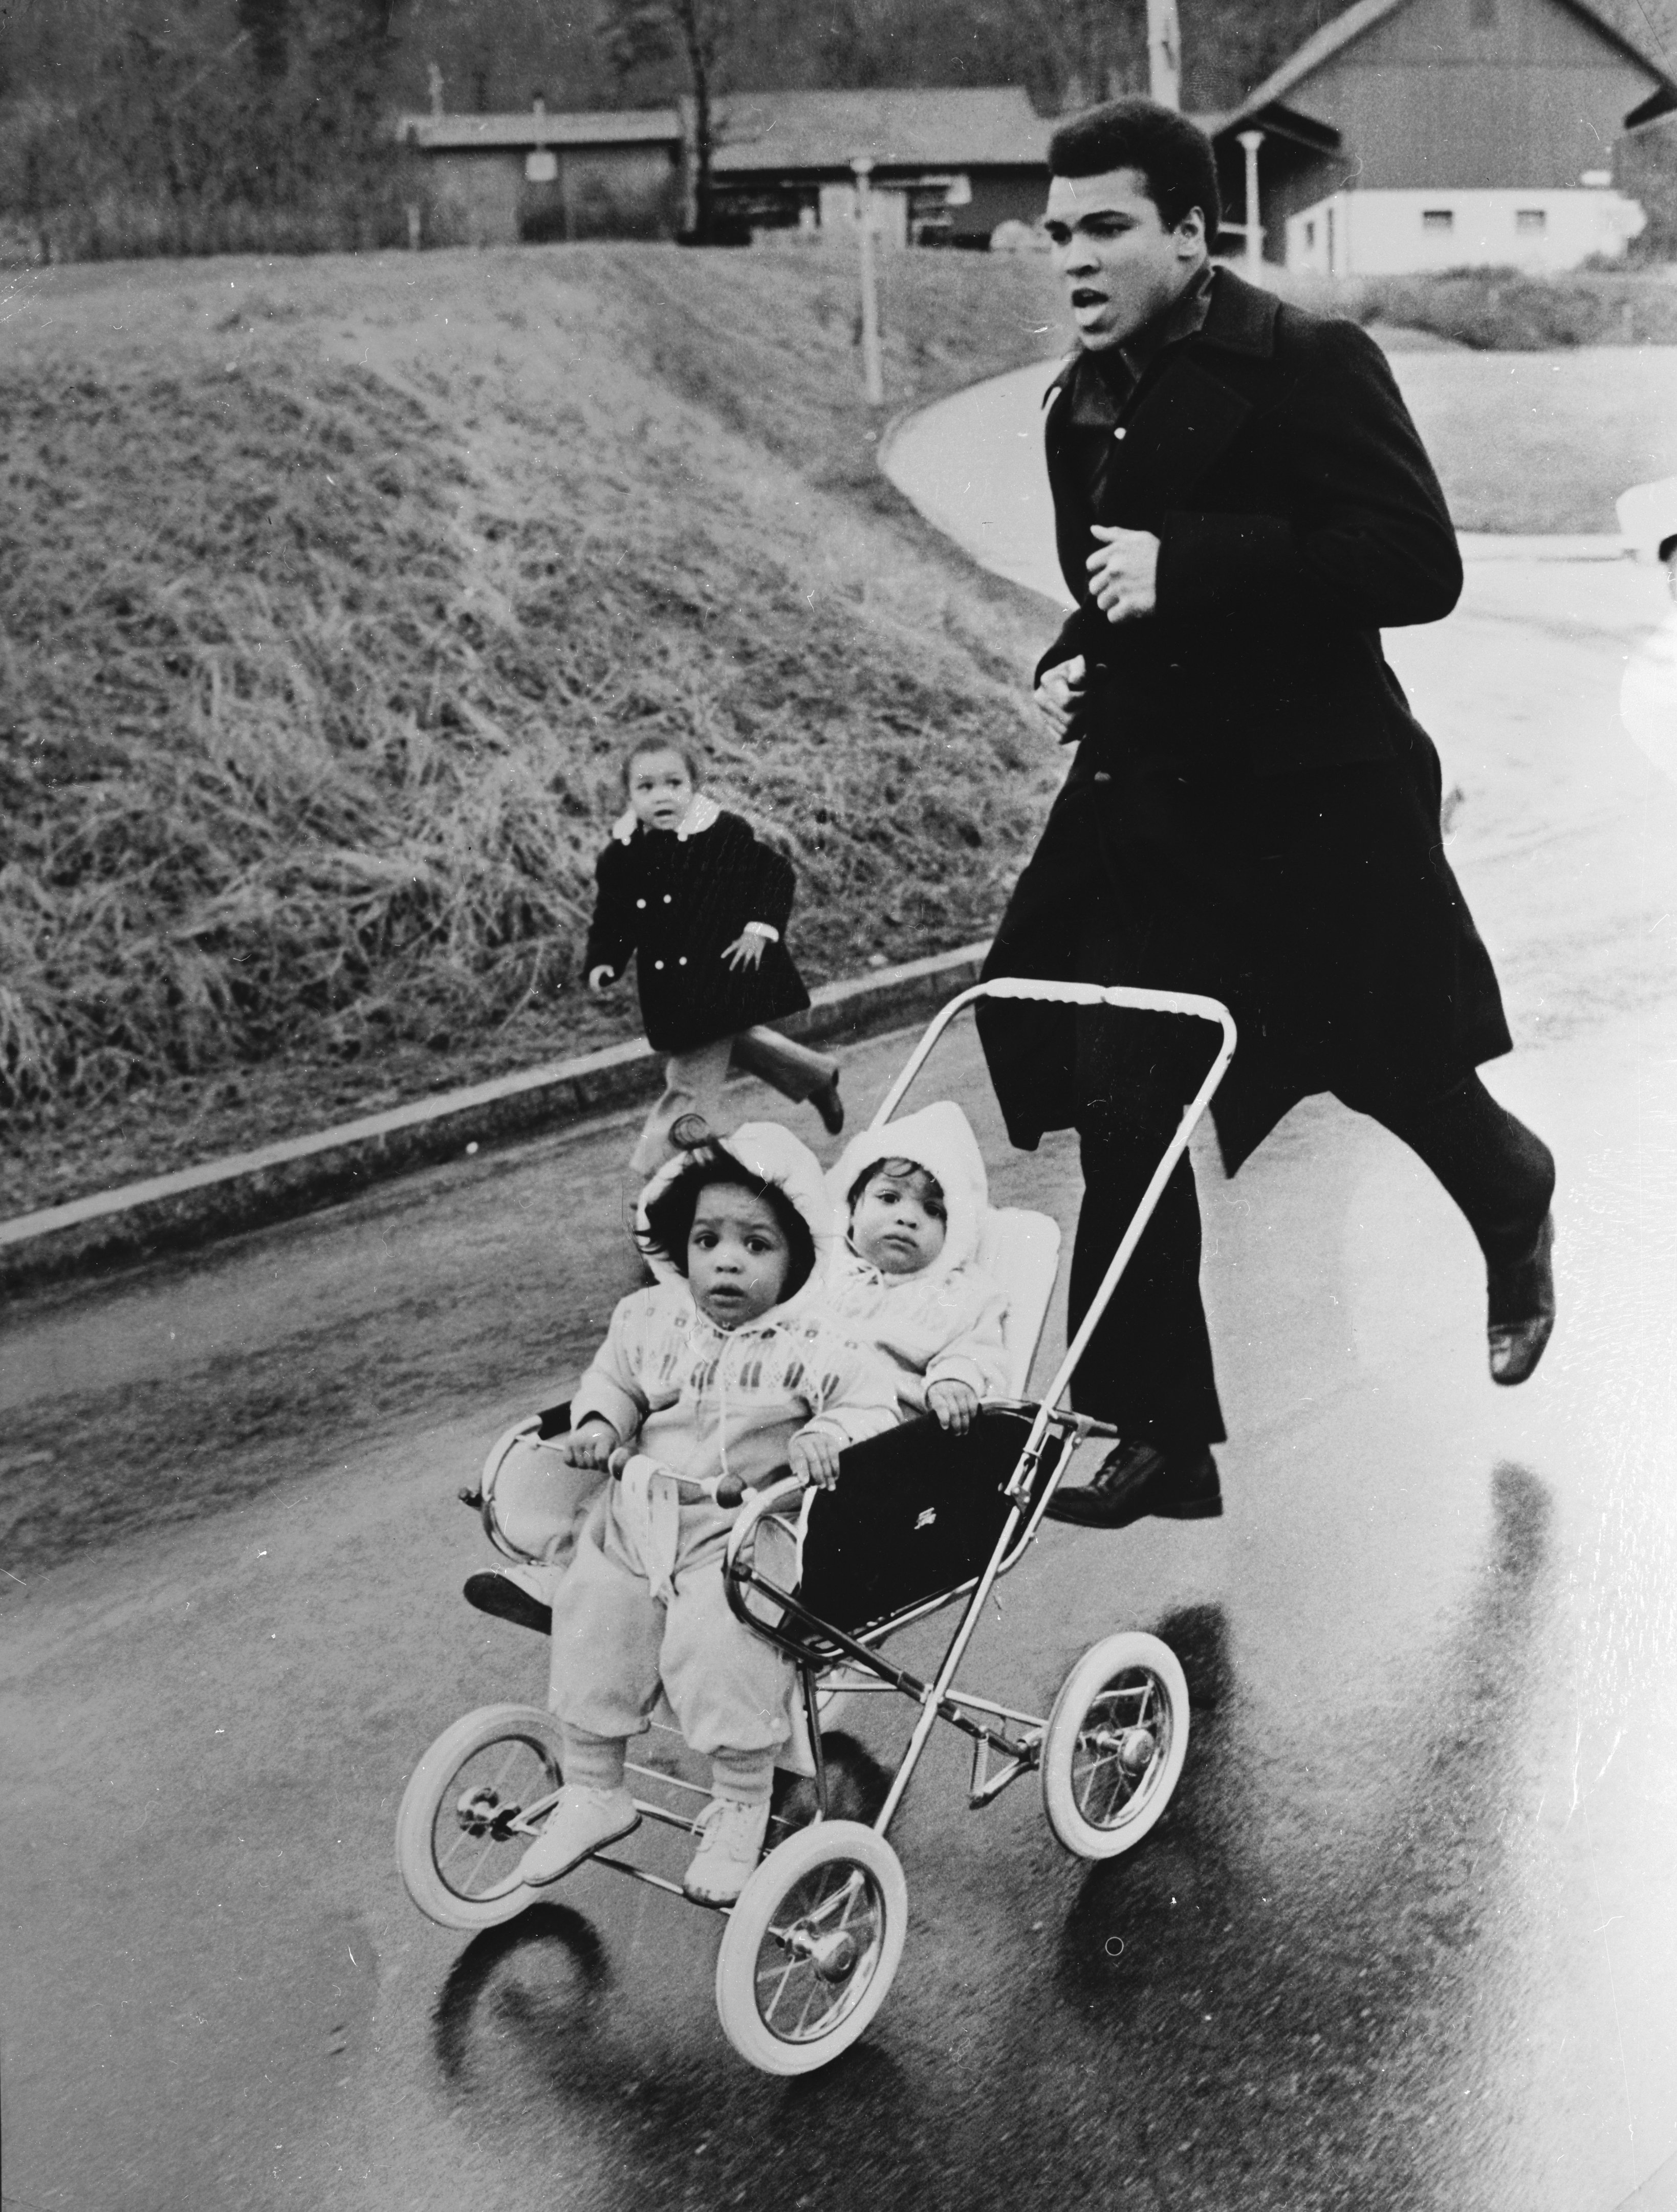 Muhammad Ali trains in Zurich with his twin daughters Jamillah and Rasheda on December 22, 1971. | Source: Getty Images